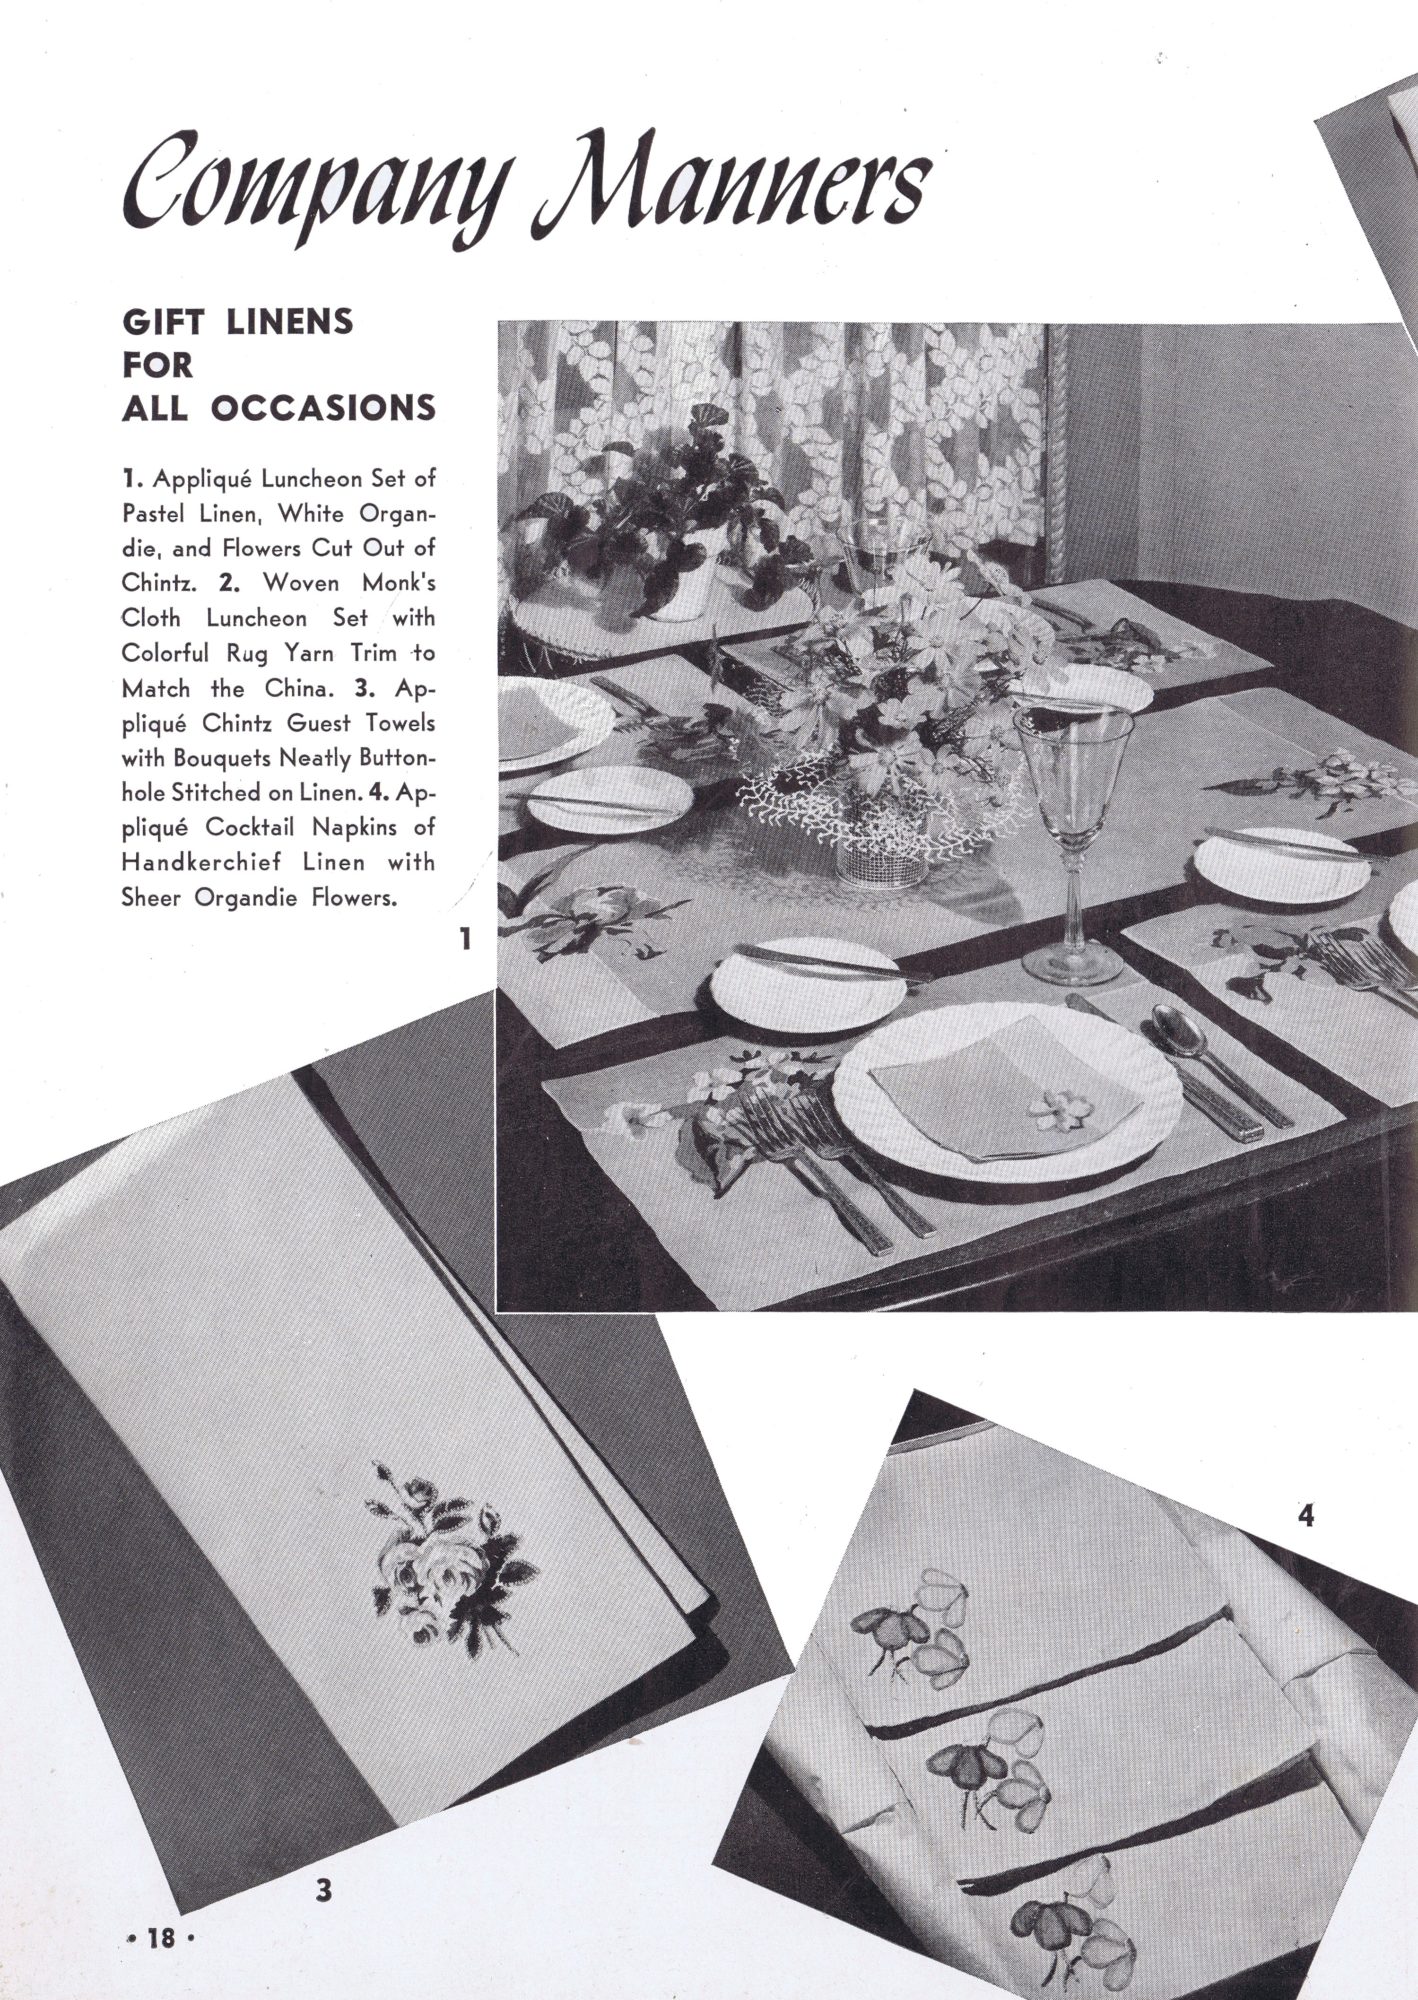 Company Manners - Gift Linens for All Occasions